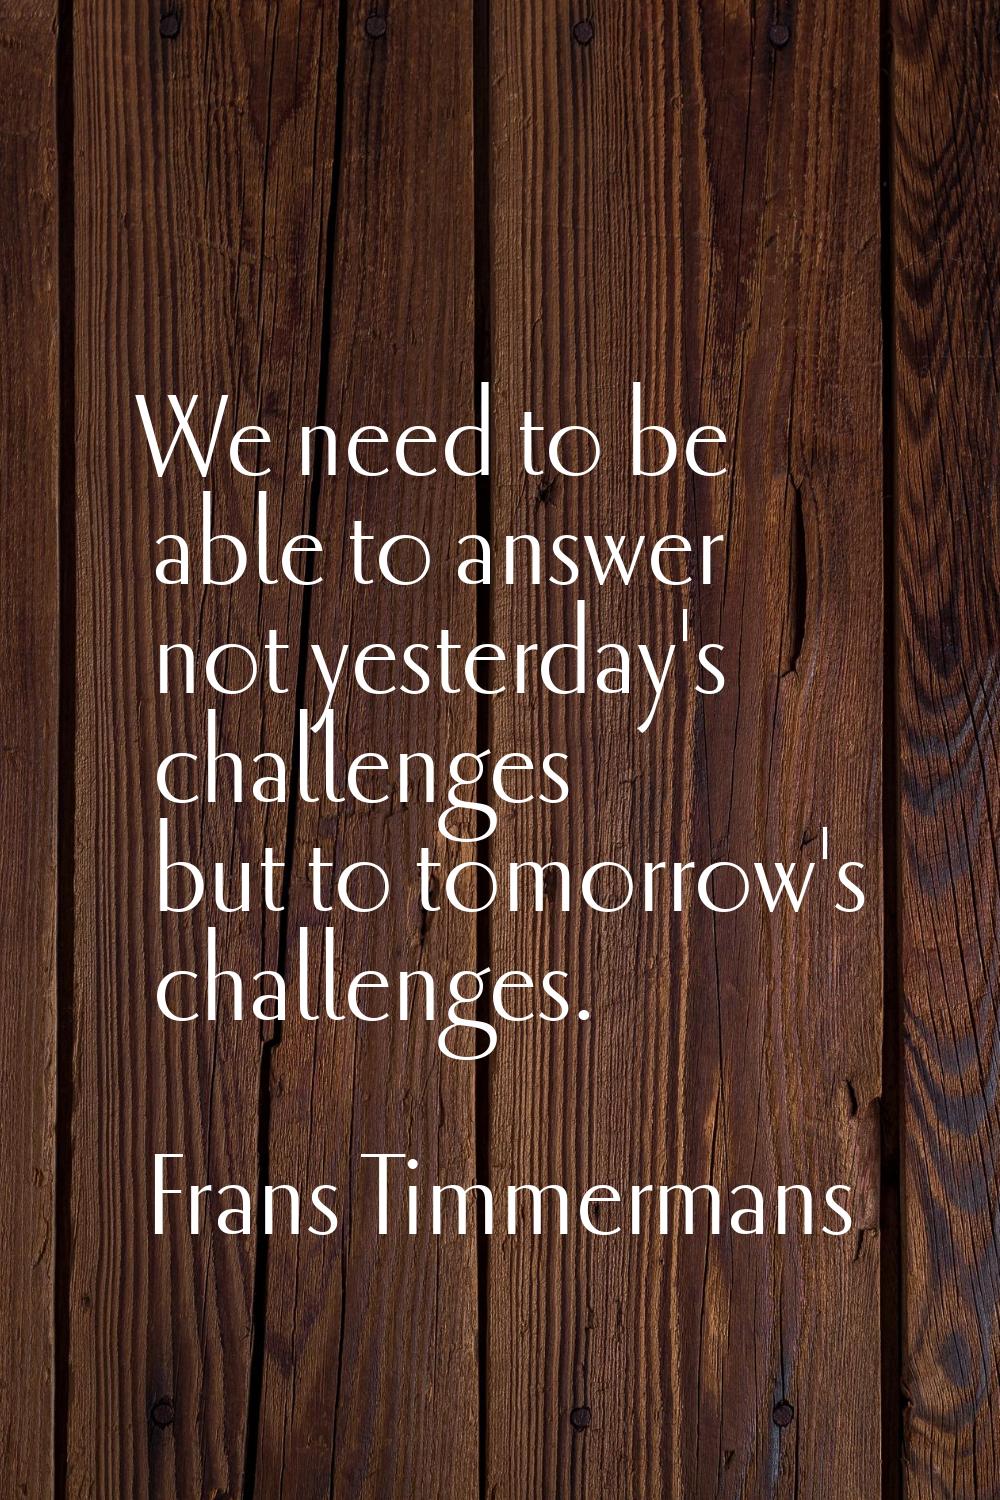 We need to be able to answer not yesterday's challenges but to tomorrow's challenges.